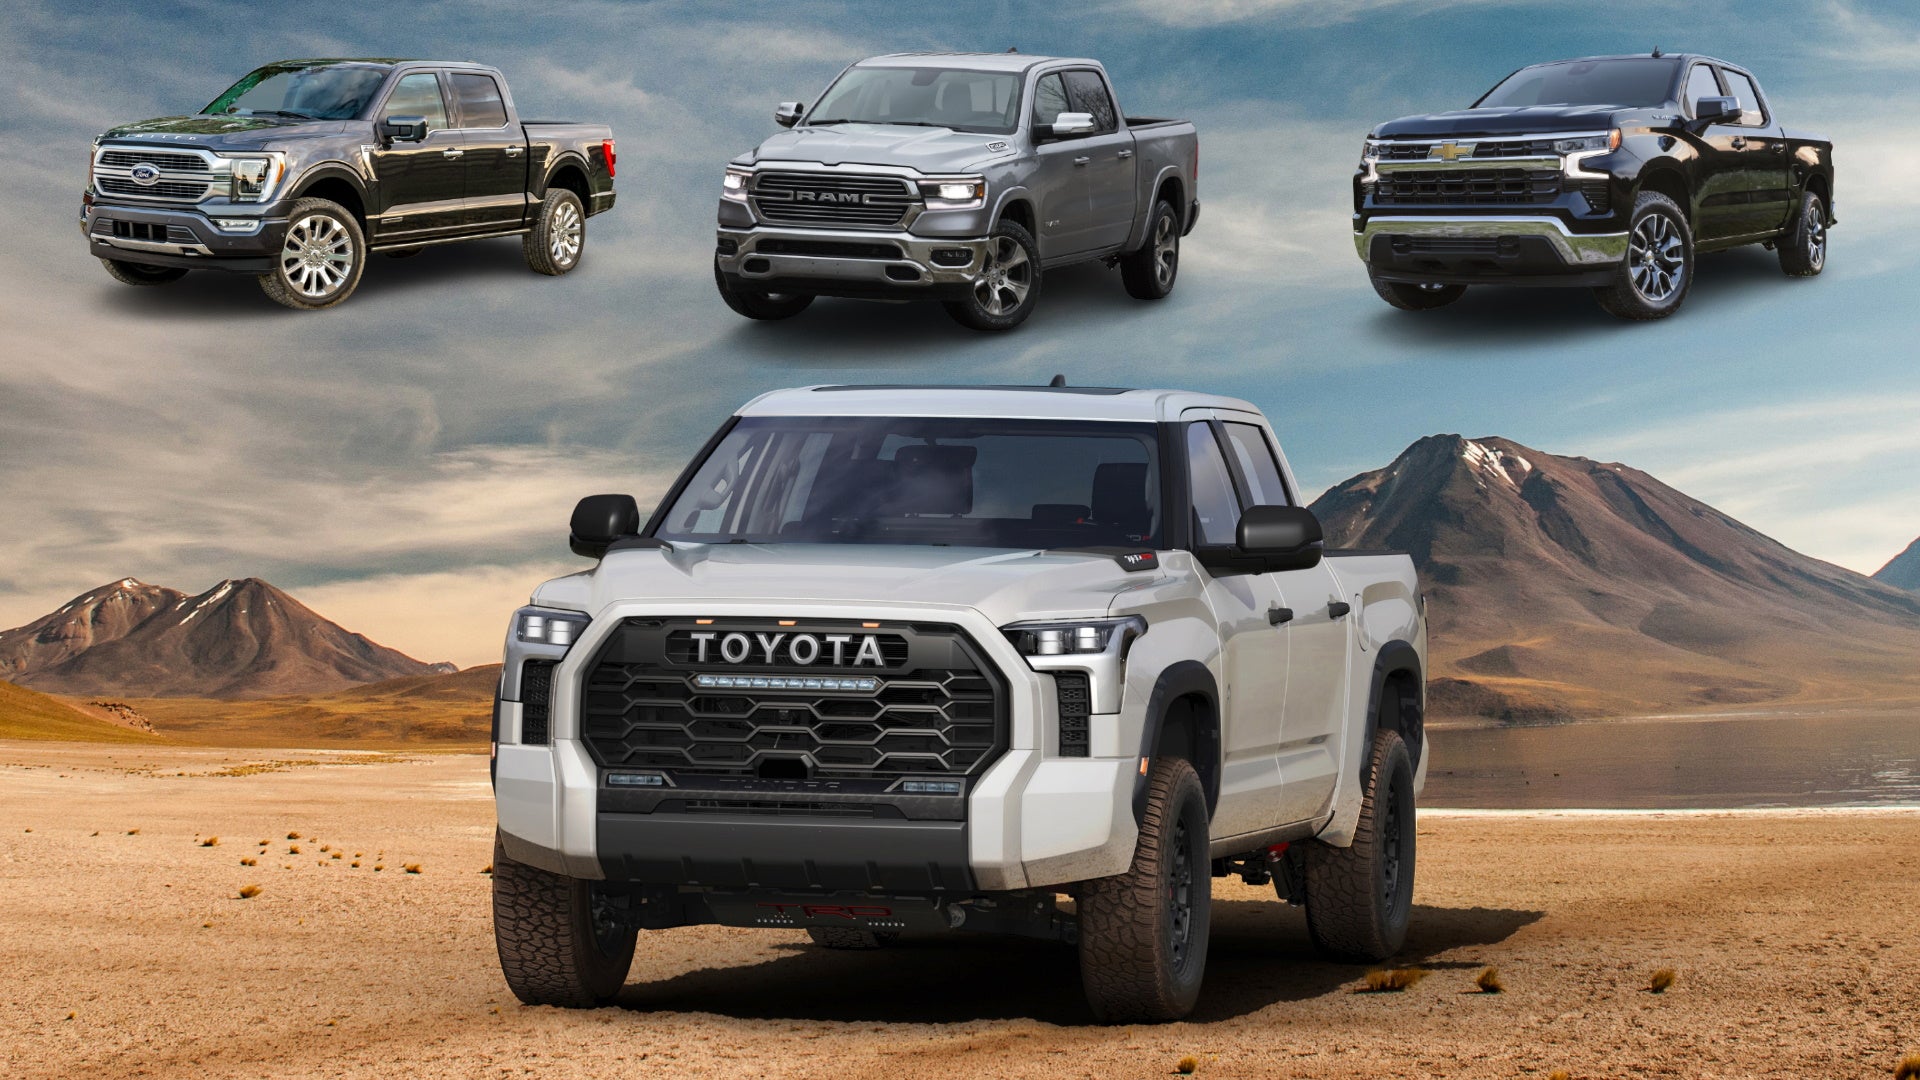 The 2022 Toyota Tundra Compared to the Ford F-150, Ram 1500, Chevy Silverado 1500